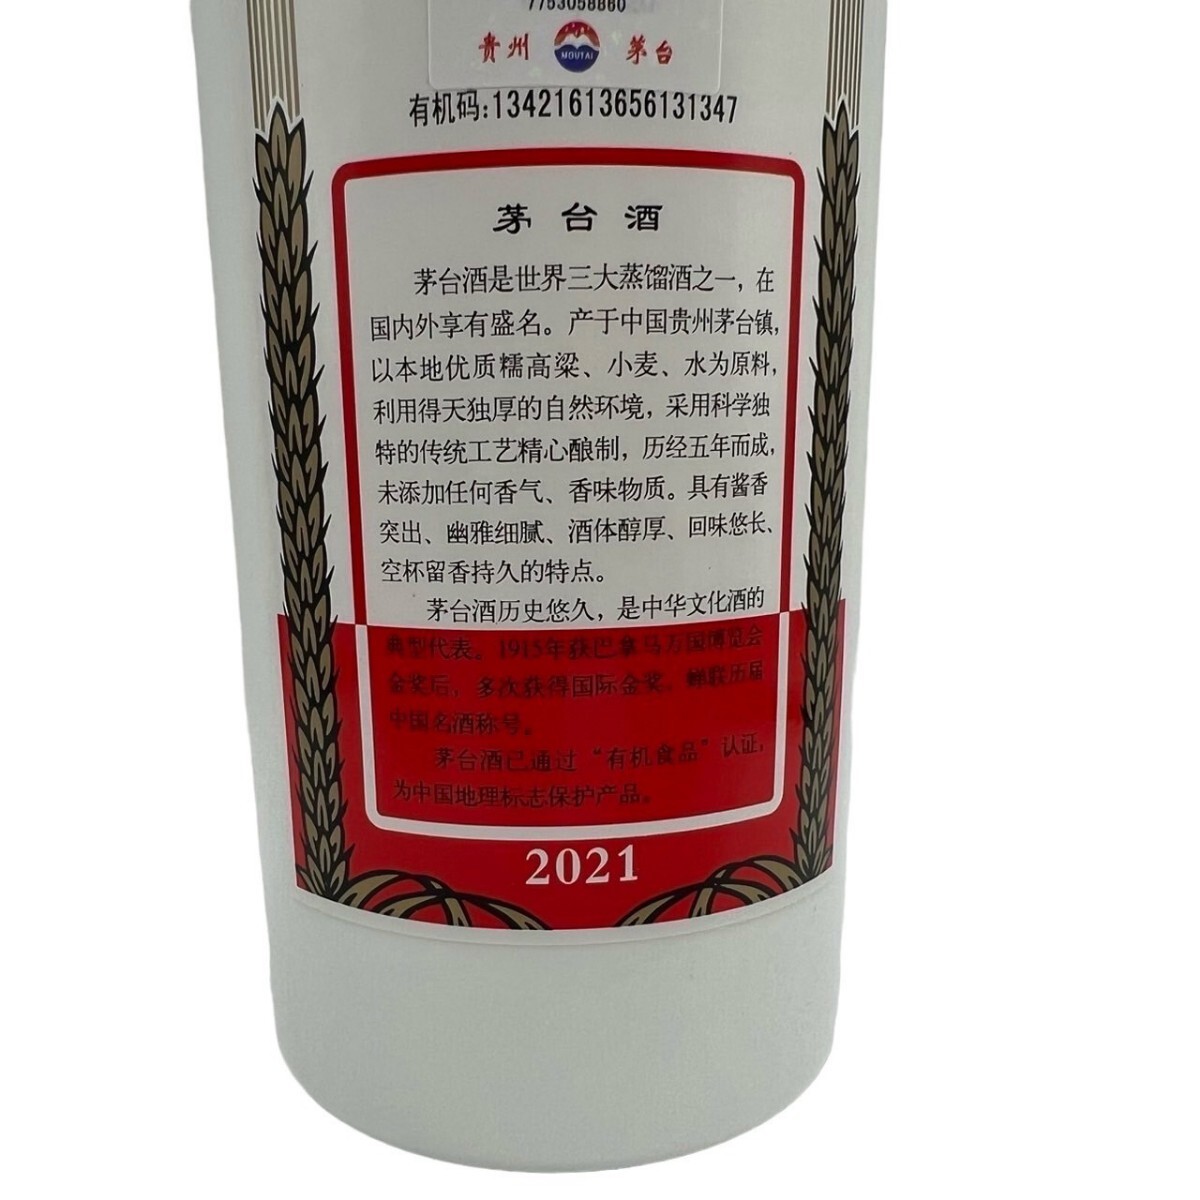 ... pcs sake mao Thai sake heaven woman label 2021 MOUTAI KWEICHOW China sake 500ml 53% box booklet glass attaching 966g 4-15-86 including in a package un- possible N